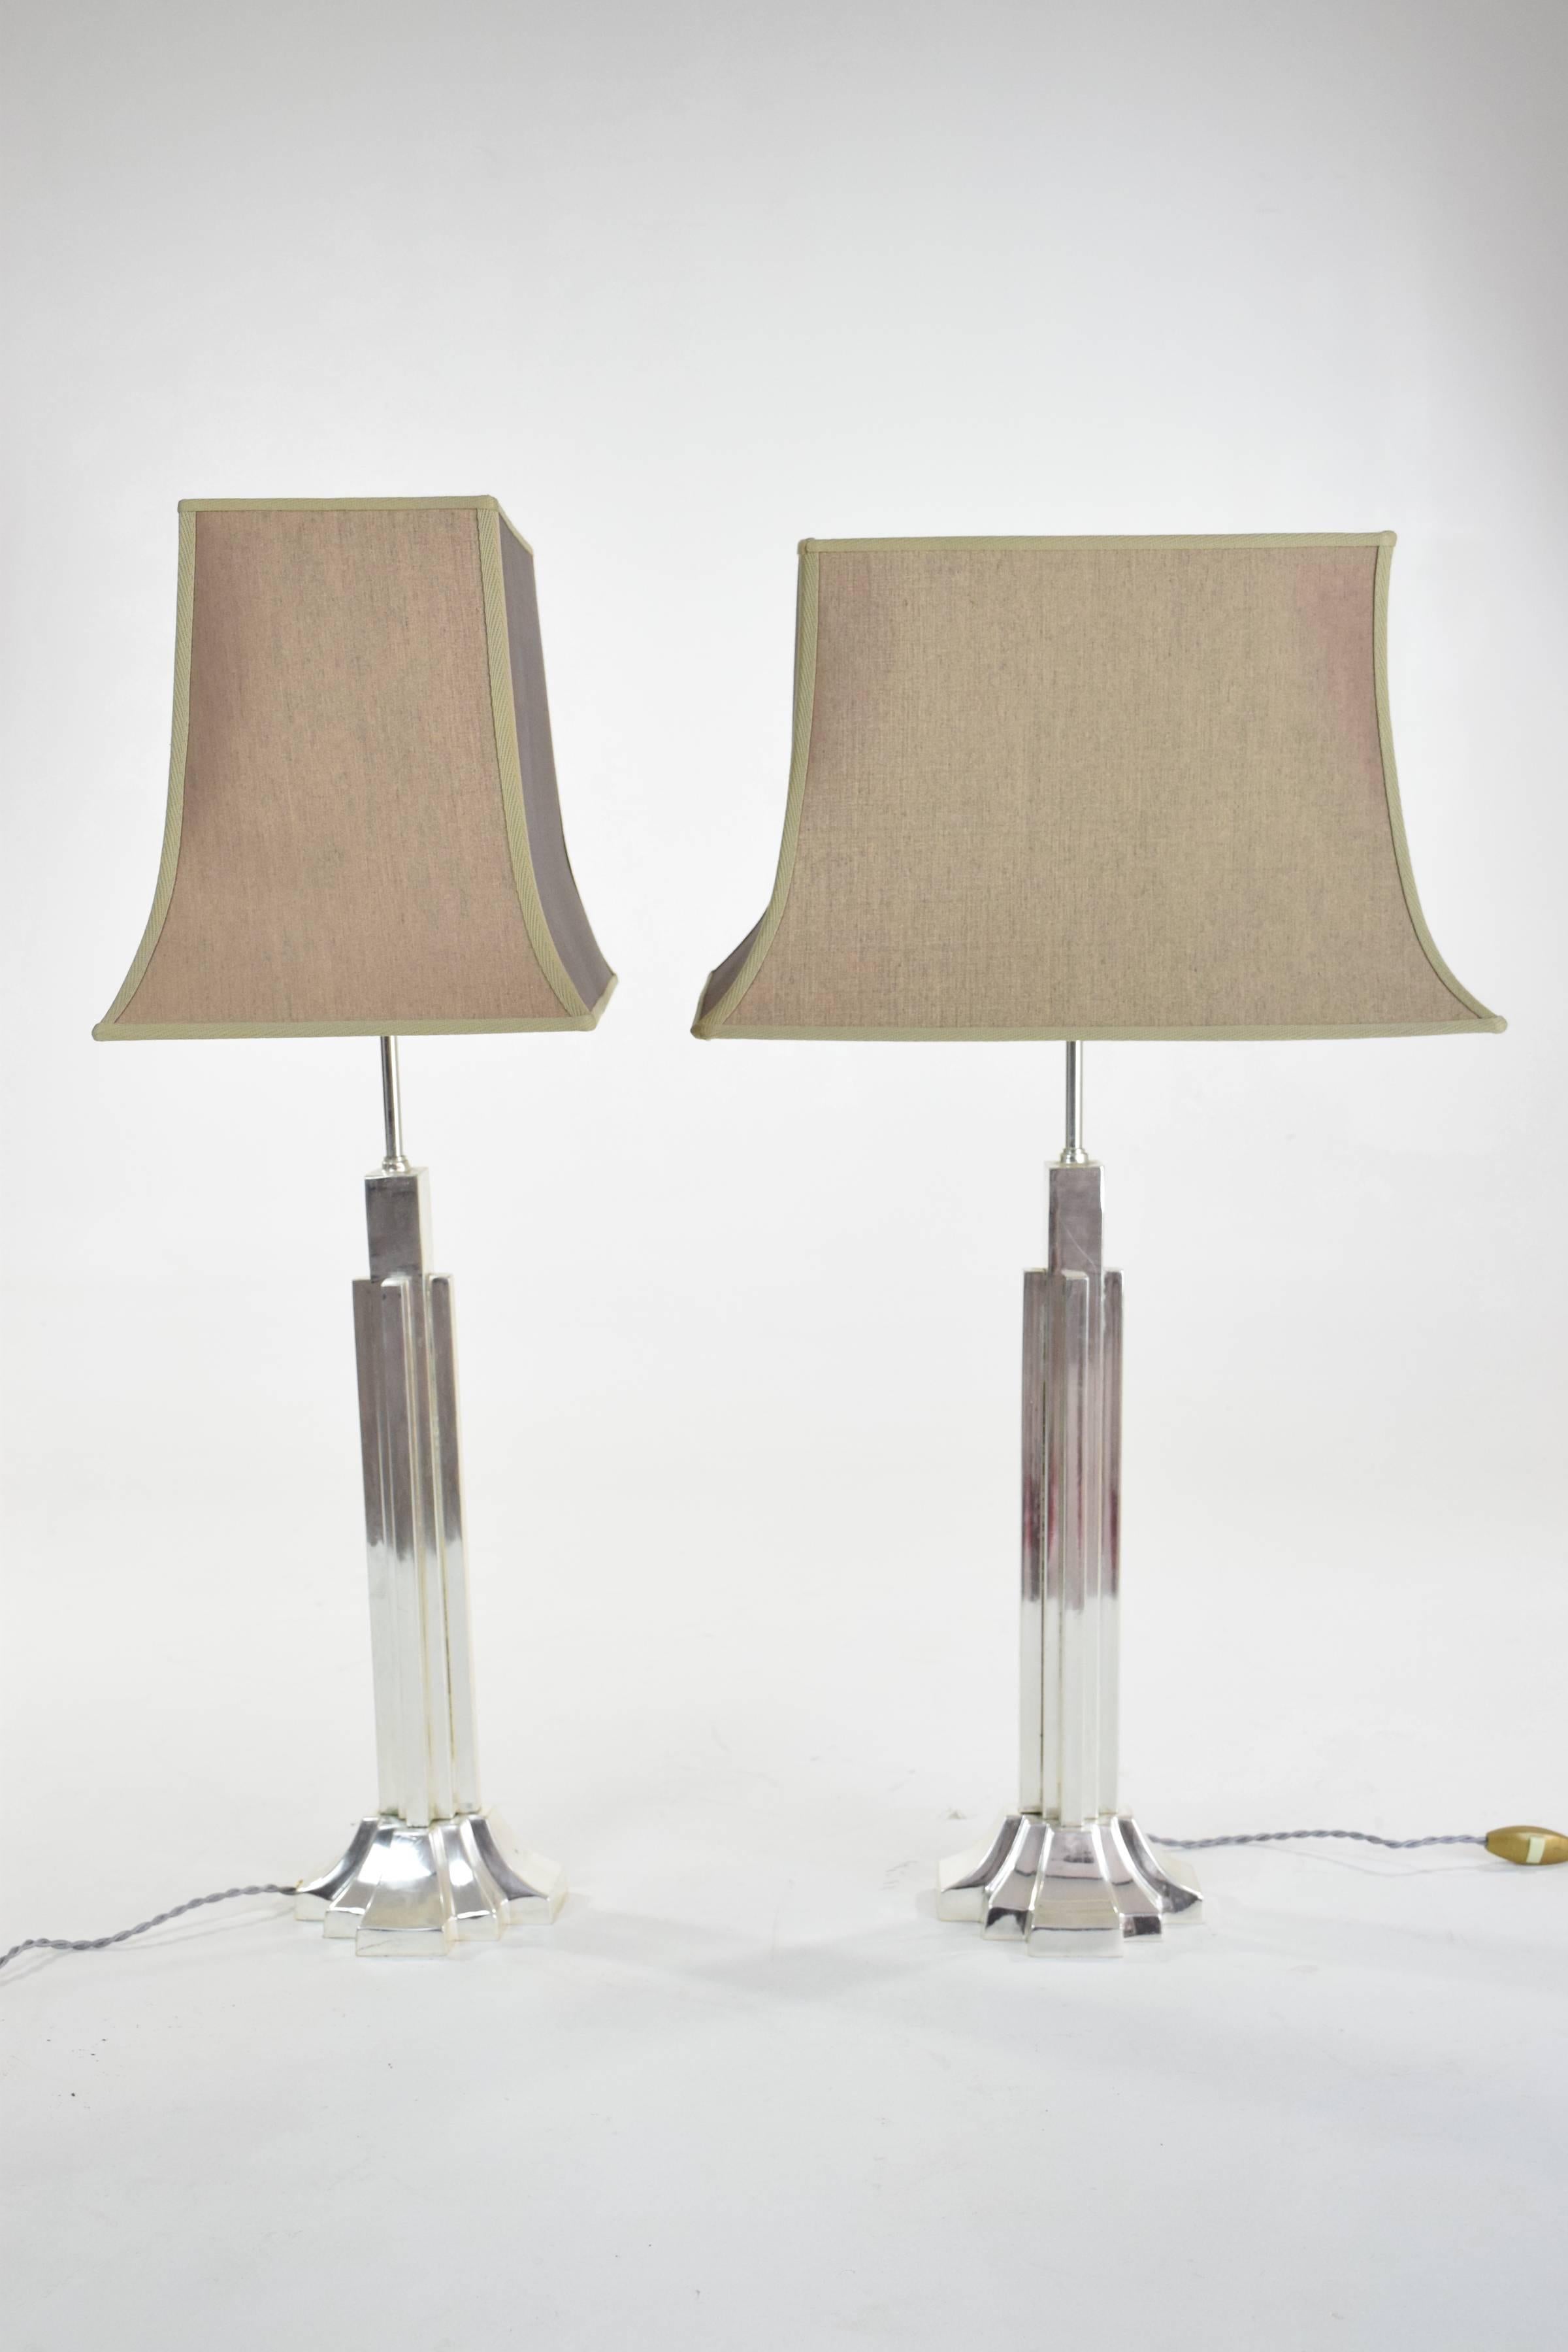 A graphic pair of French Art Deco table lamps of Asian influence with silvered brass structures produced around the 1930s. They have been fully restored with new shades, rewired and tested.